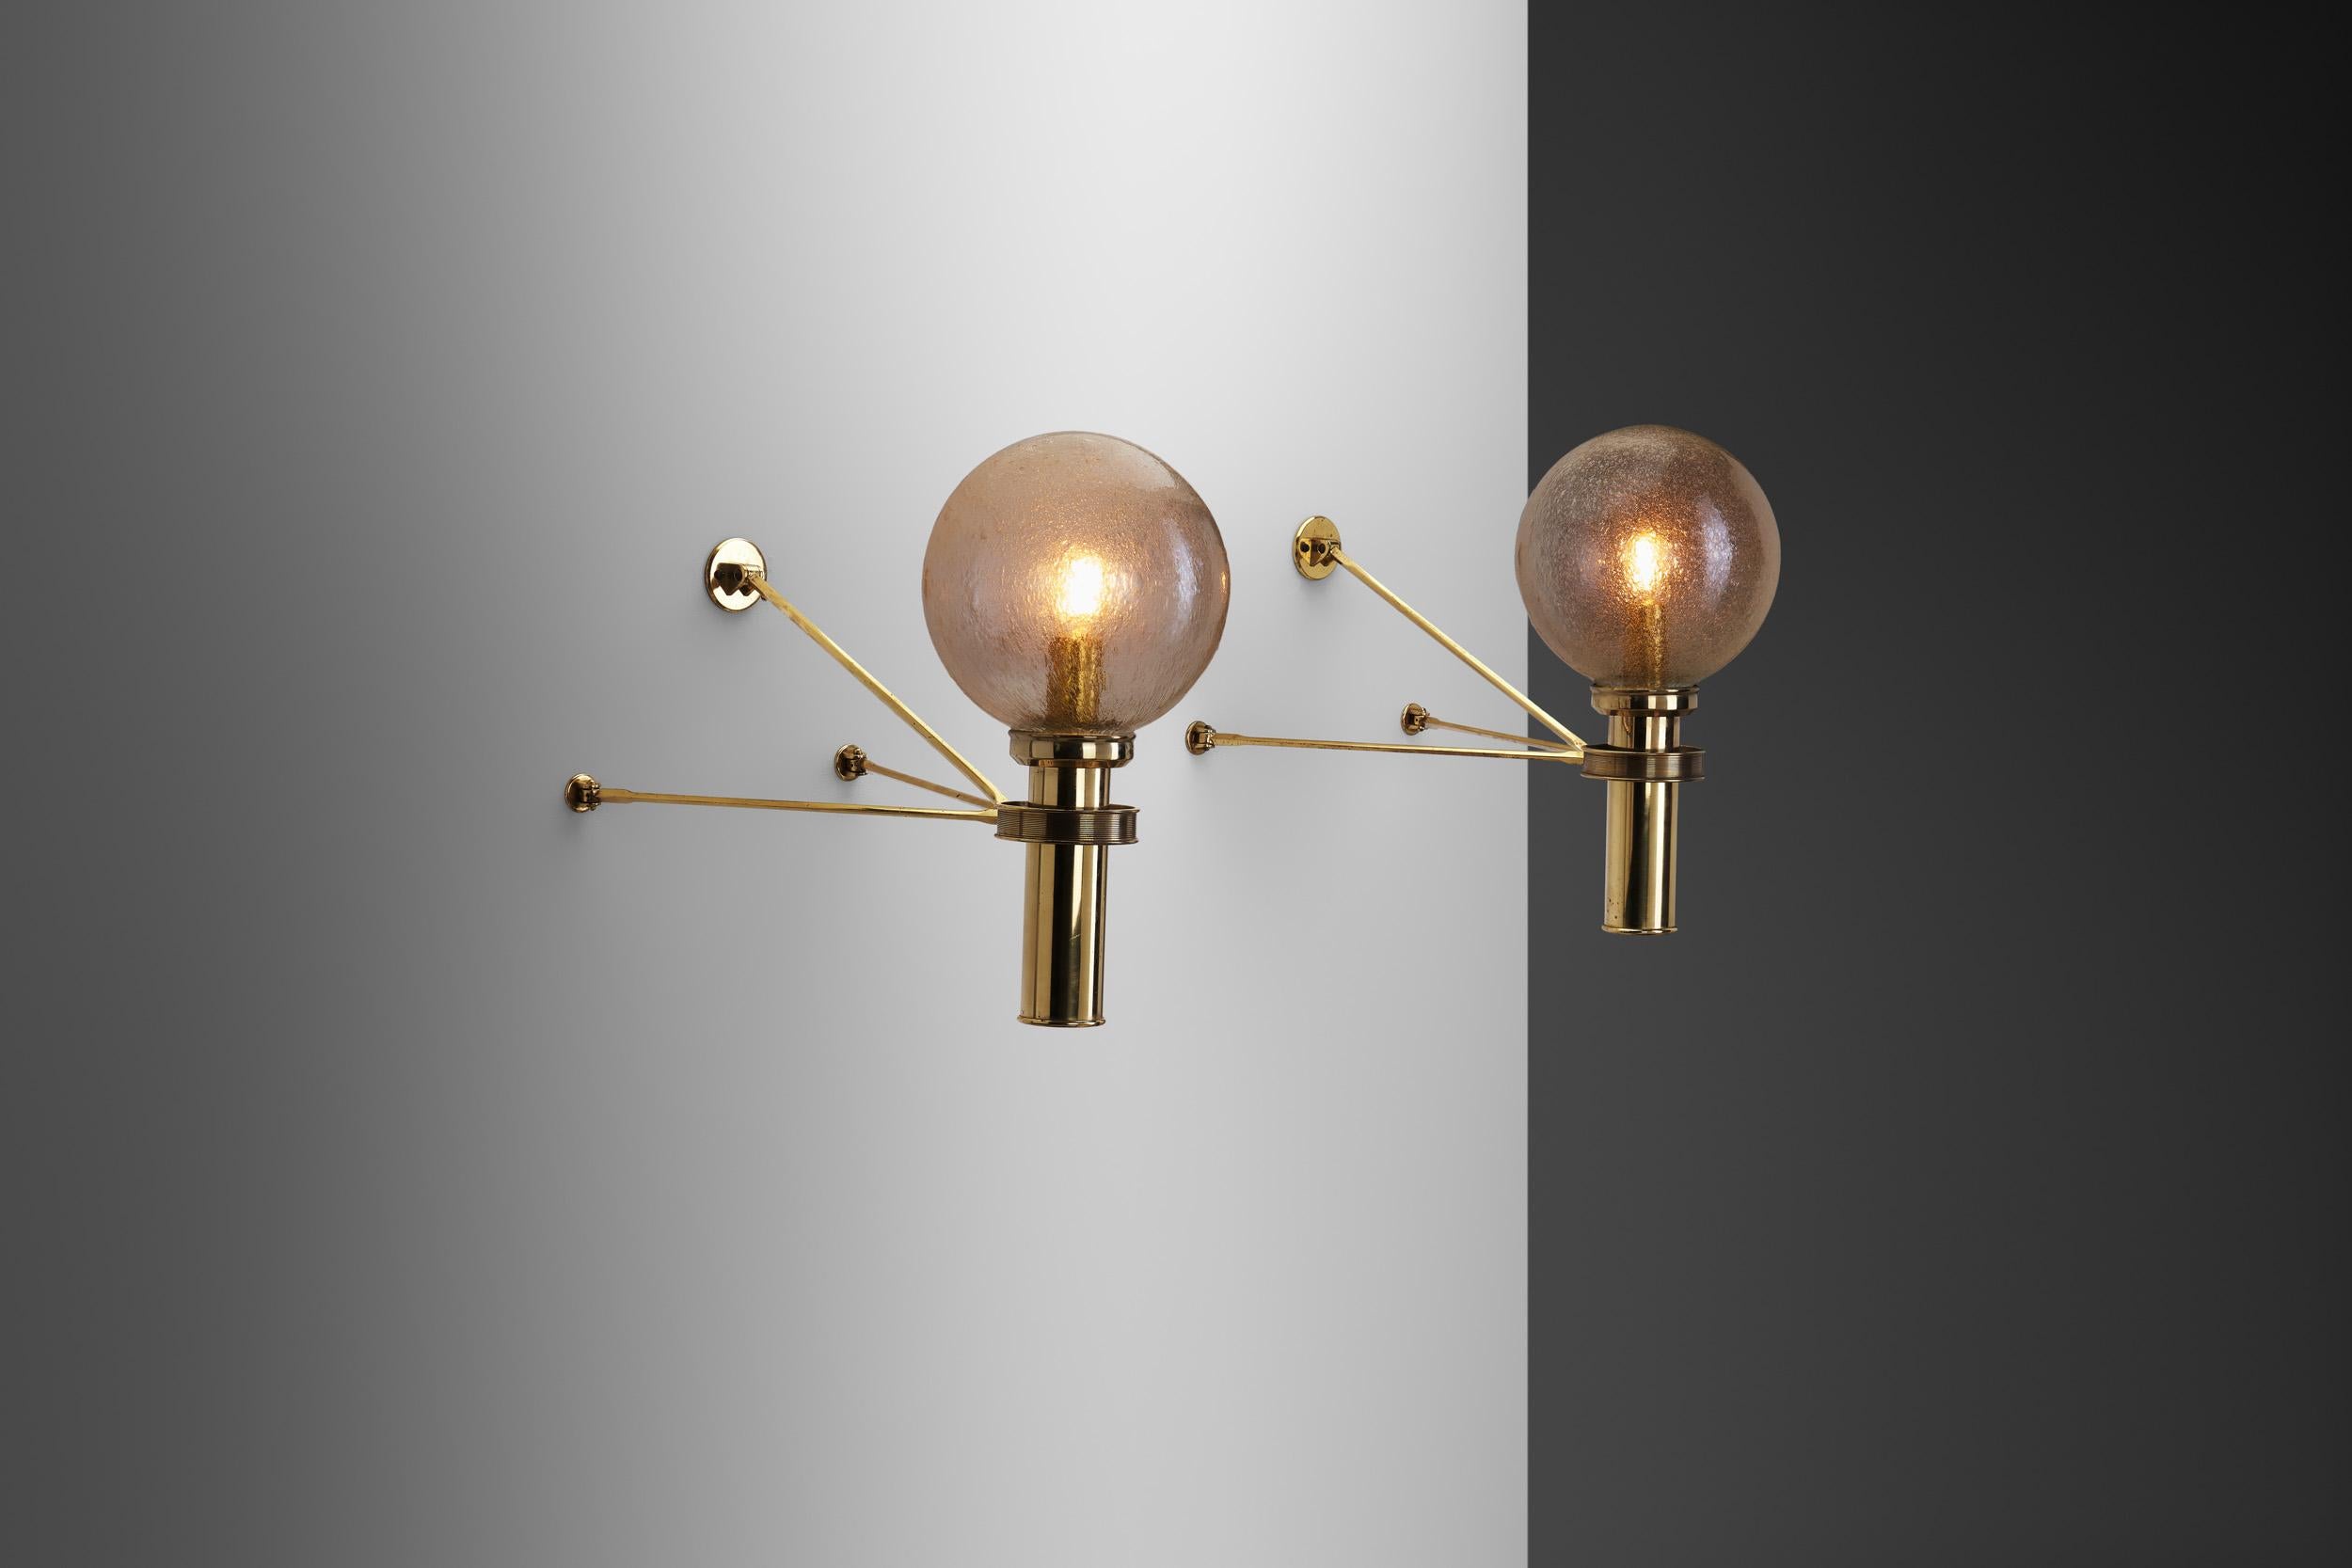 The best qualities of European mid-century designers’ light fixtures are most often their atmospheric light, disciplined, functionalist design completed by unique solutions and design elements. Exemplified by these wall lamps, these qualities are